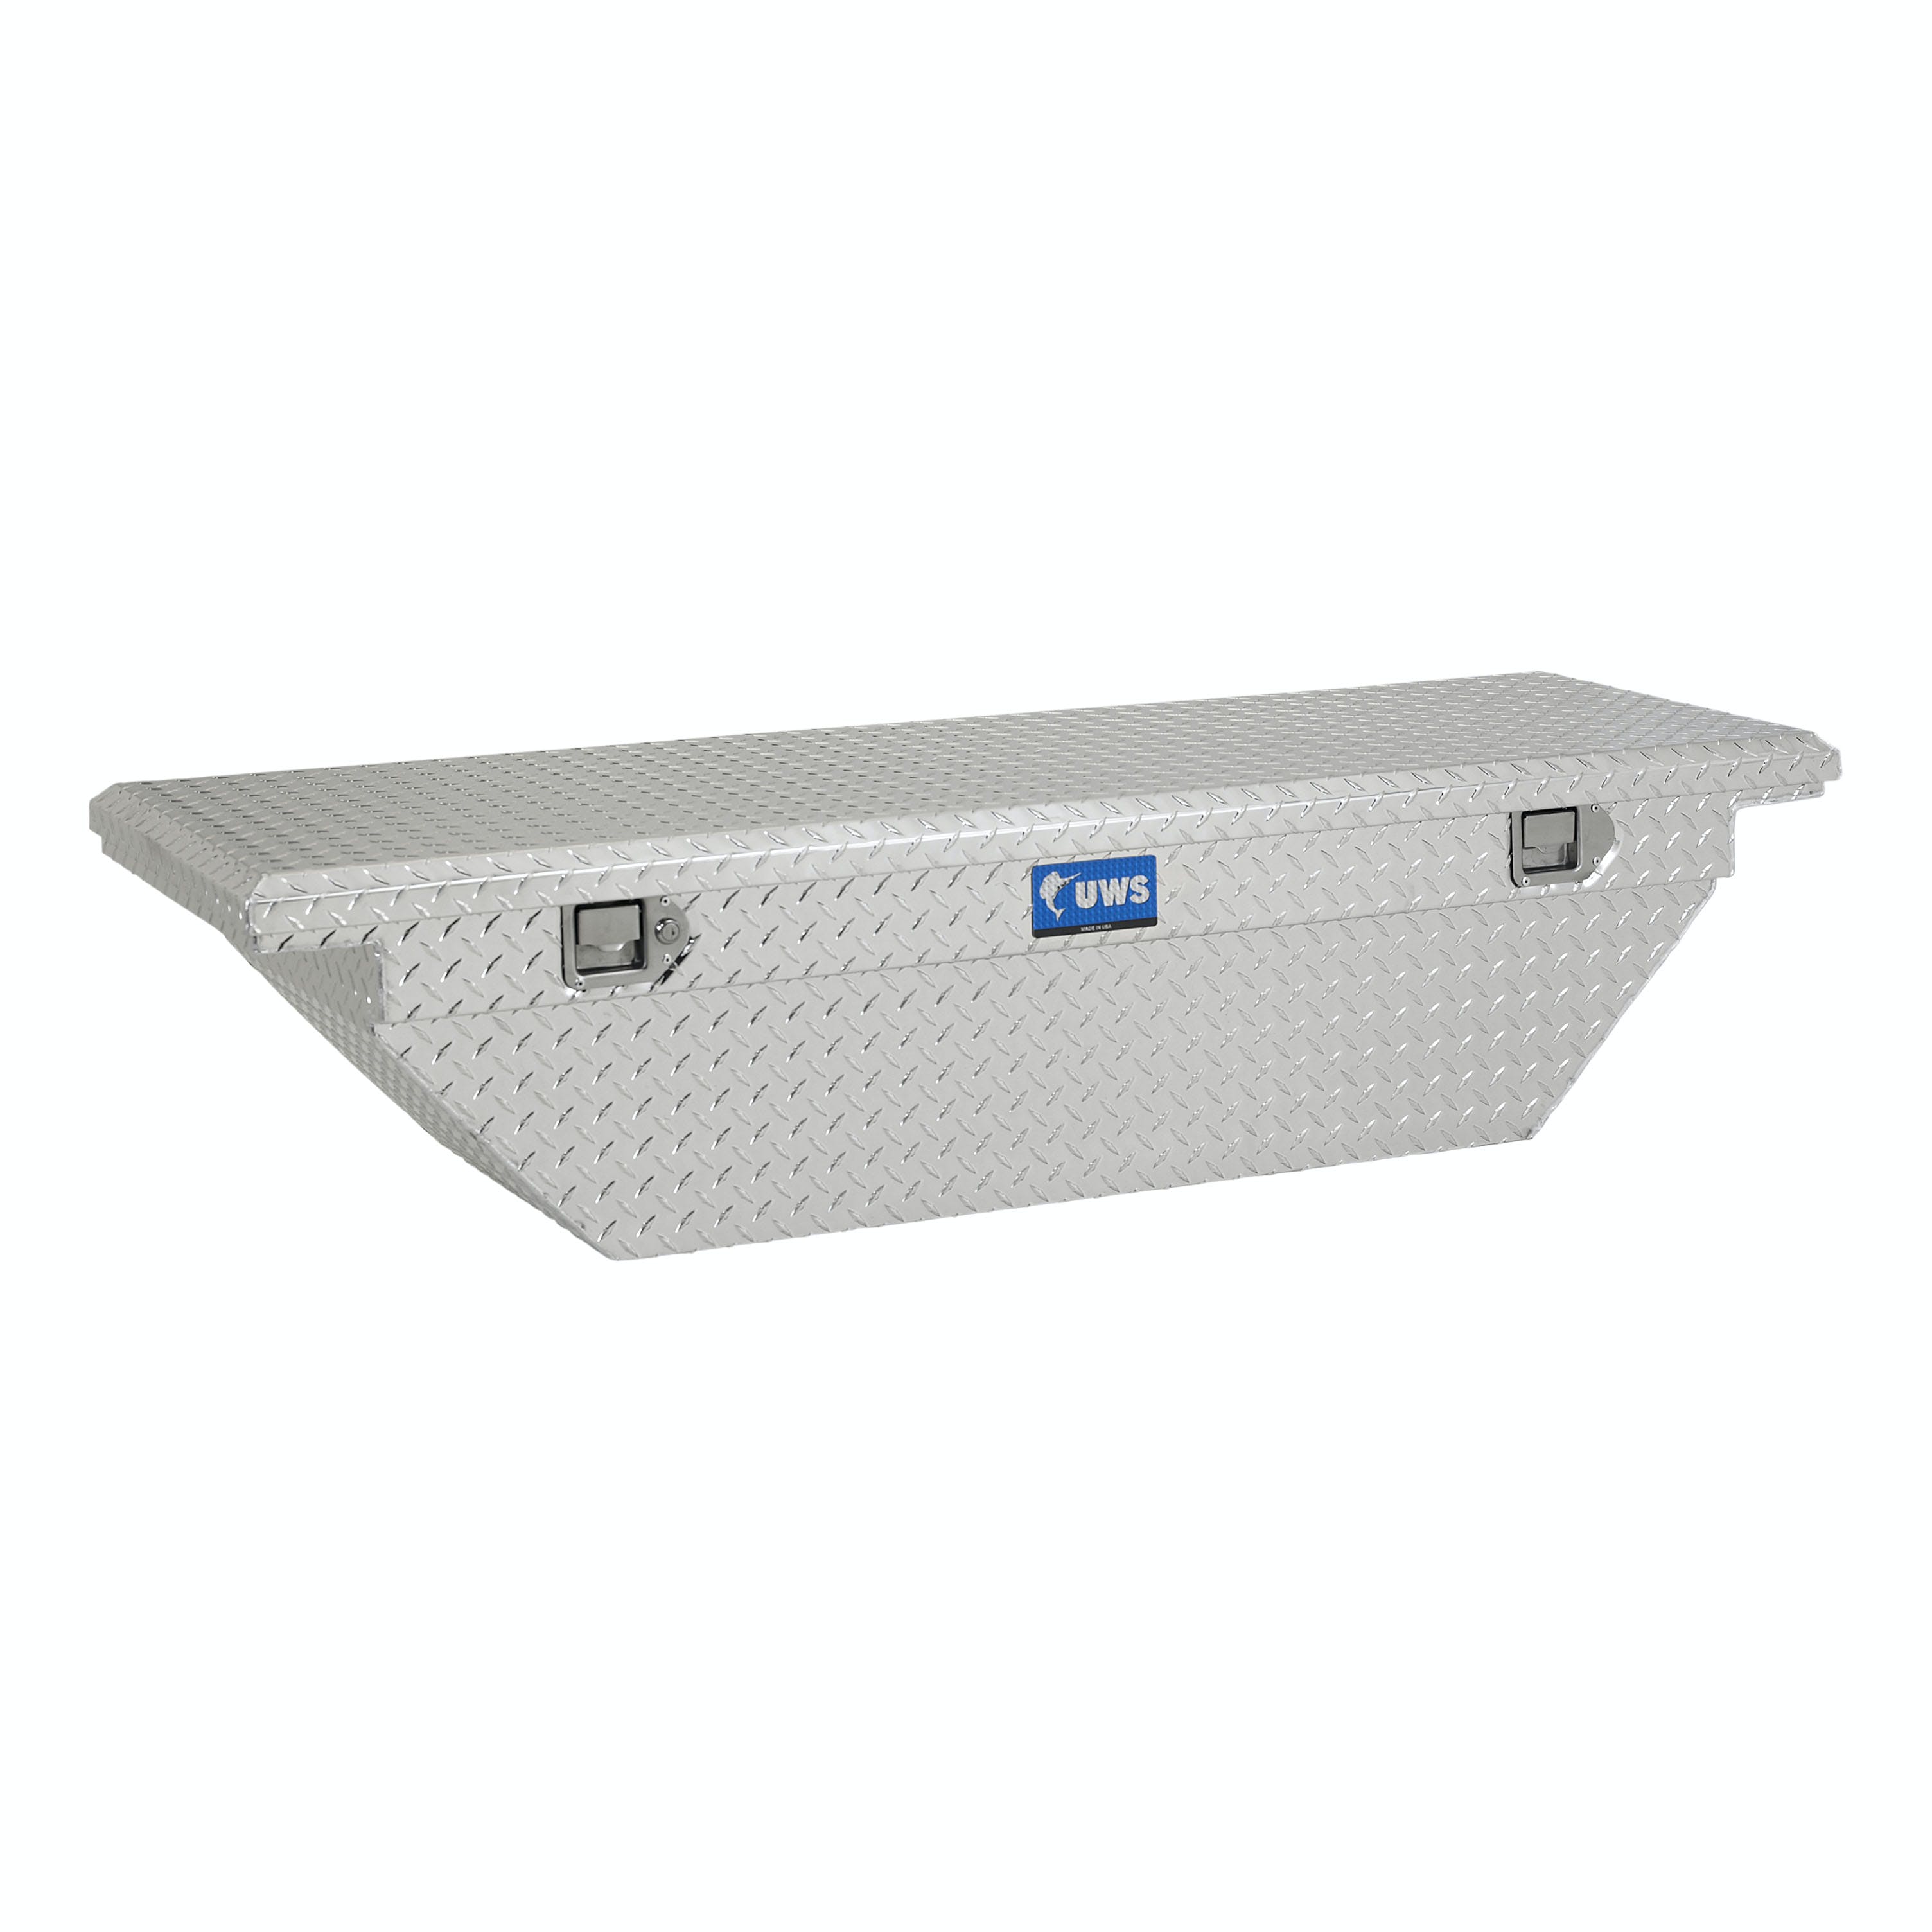 UWS EC10291 63 in. Angled Crossover Single Lid Truck Tool Box